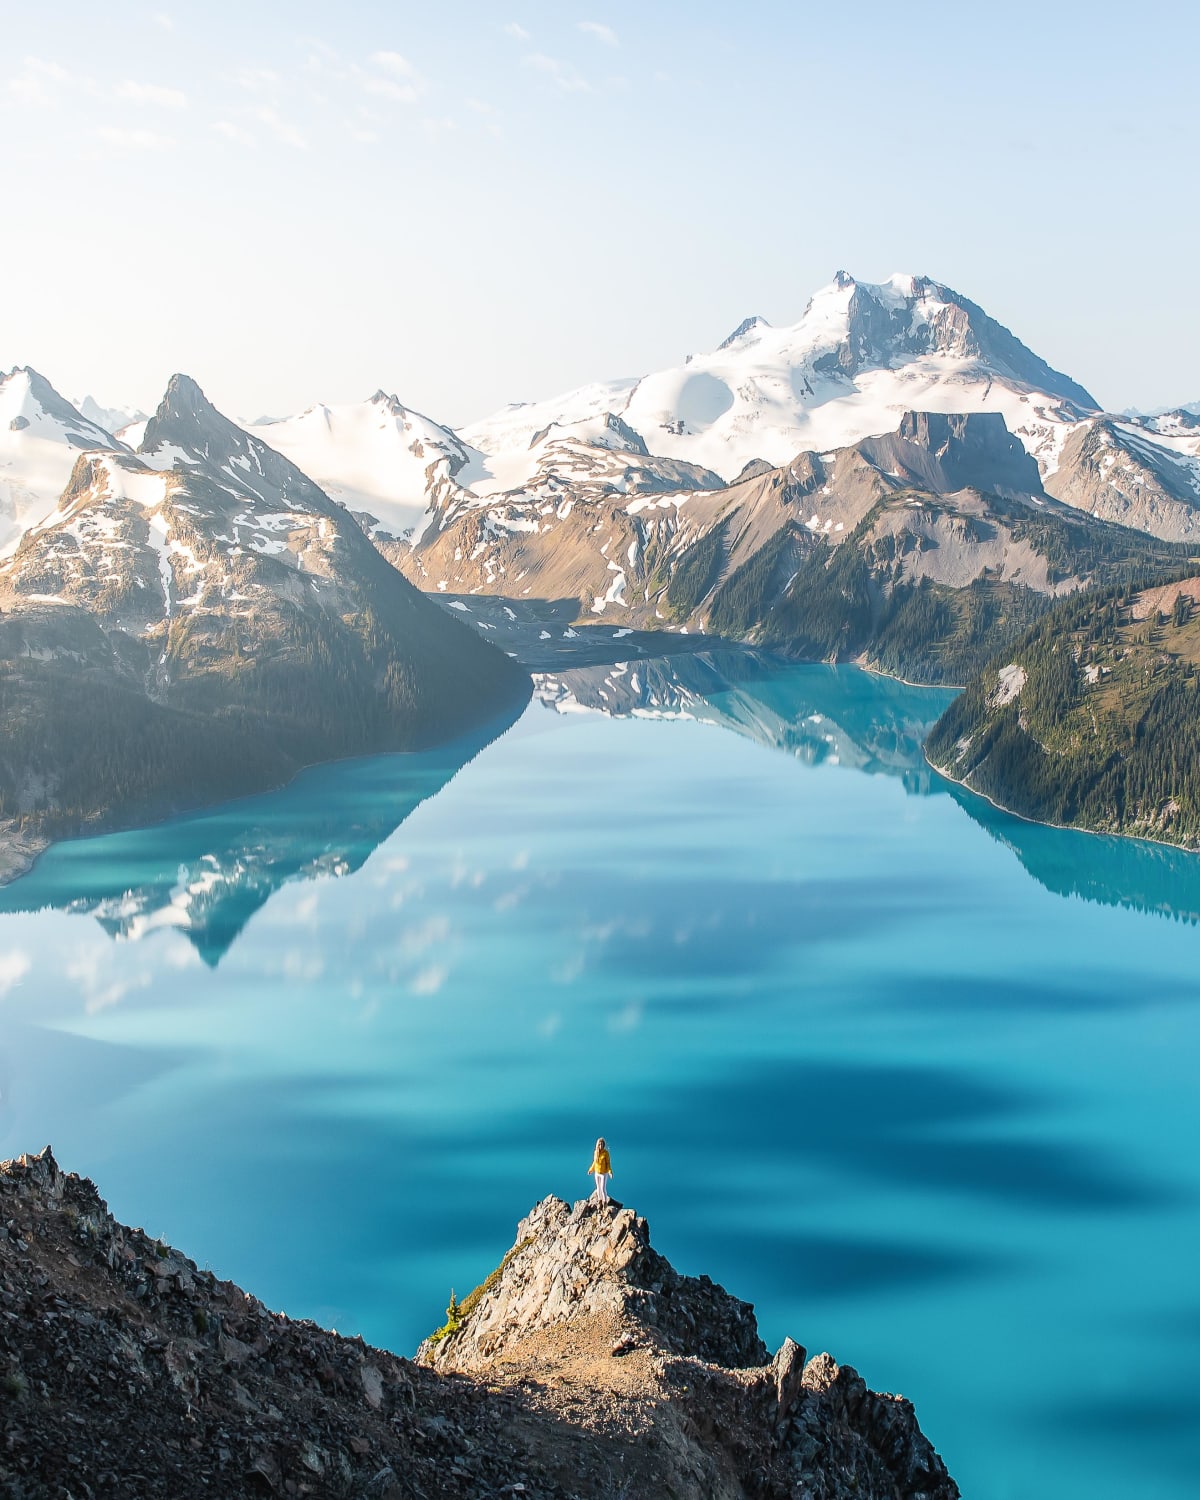 High above Garibaldi Lake, Panorama Ridge Canada. This hike begins 45 minutes from Vancouver, and is about 4-5 hours one way.